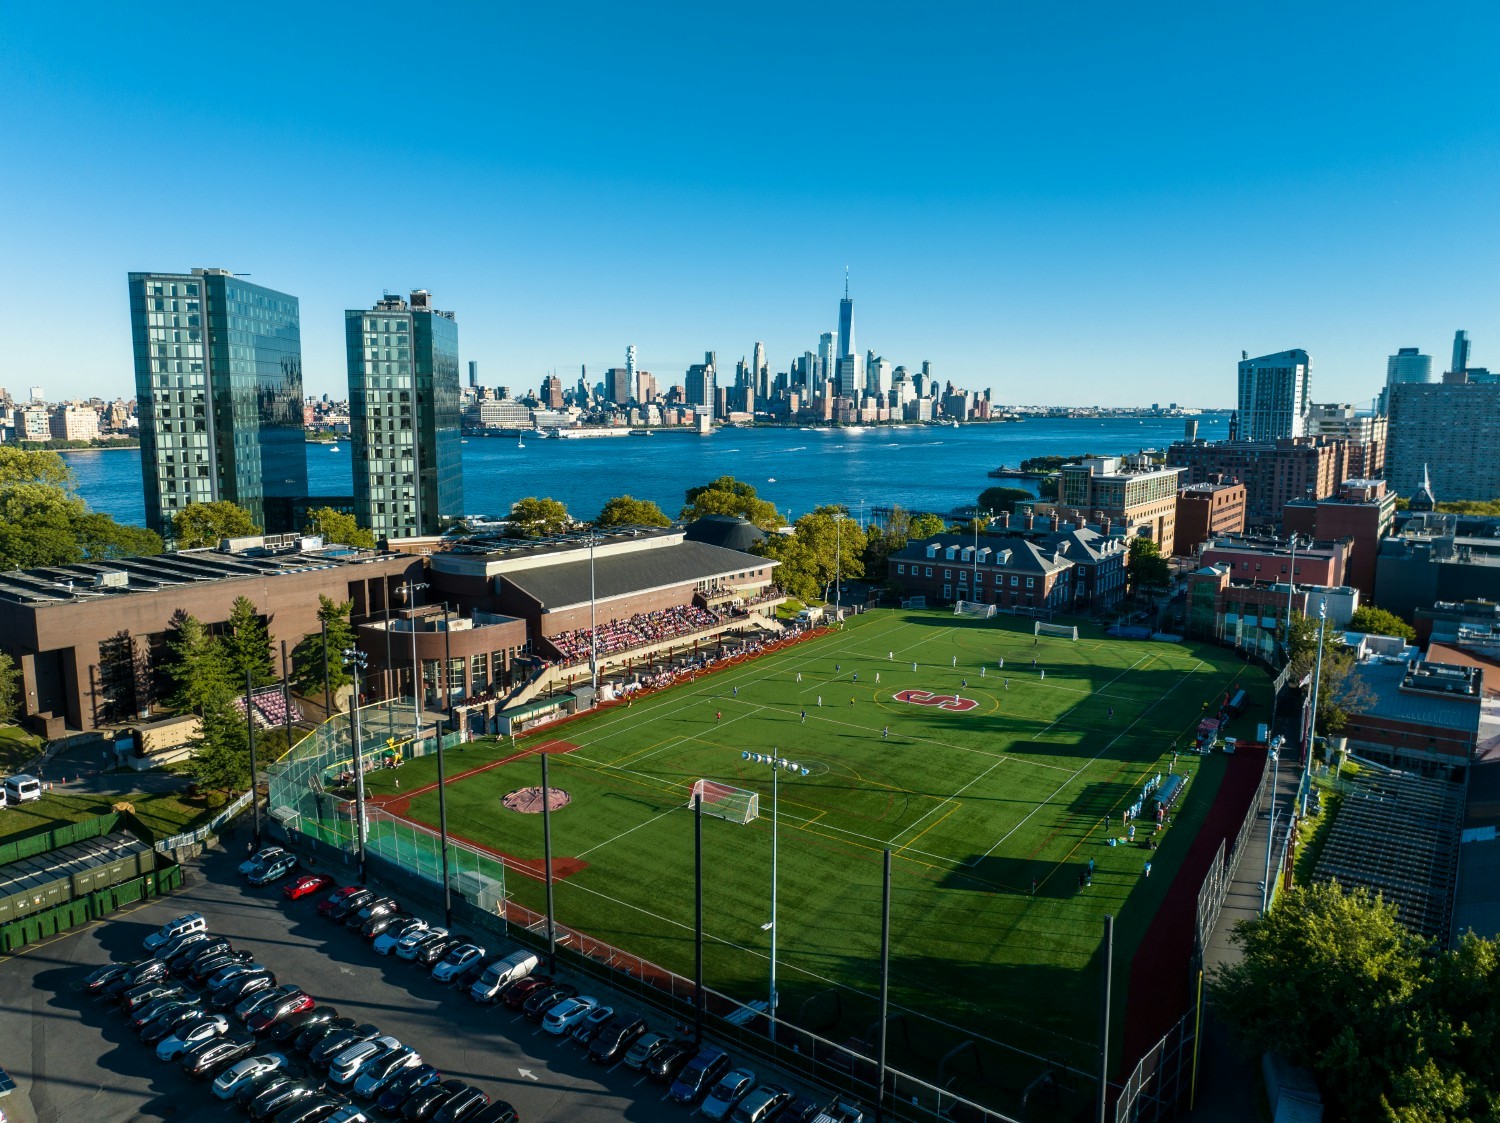 Located in Hoboken, New Jersey, Stevens enjoys both a small town feel and close proximity to New York City.